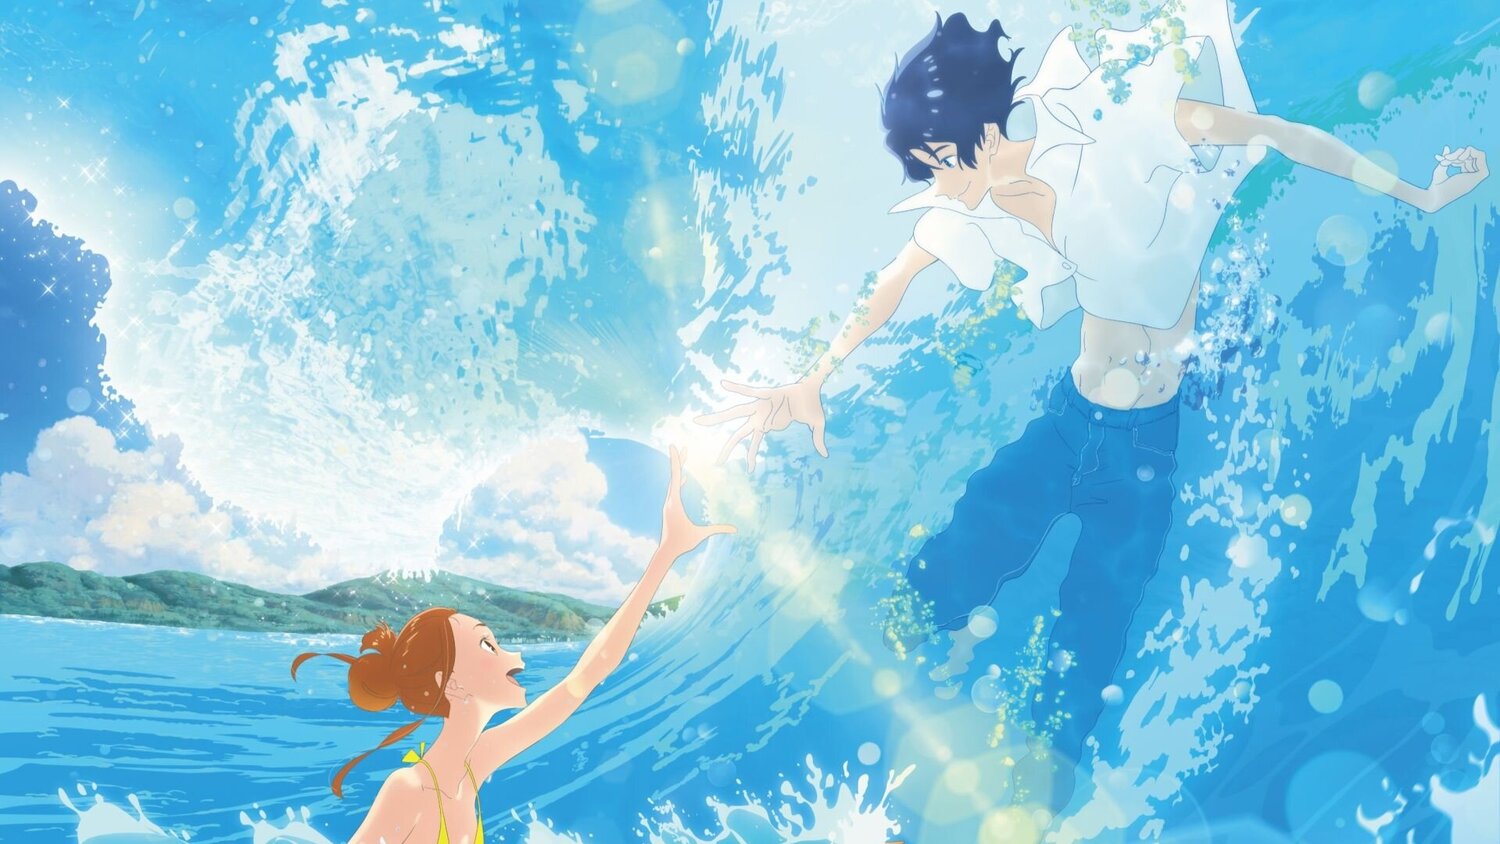 Ride Your Wave Review: Touching anime breaks conventions * AIPT.